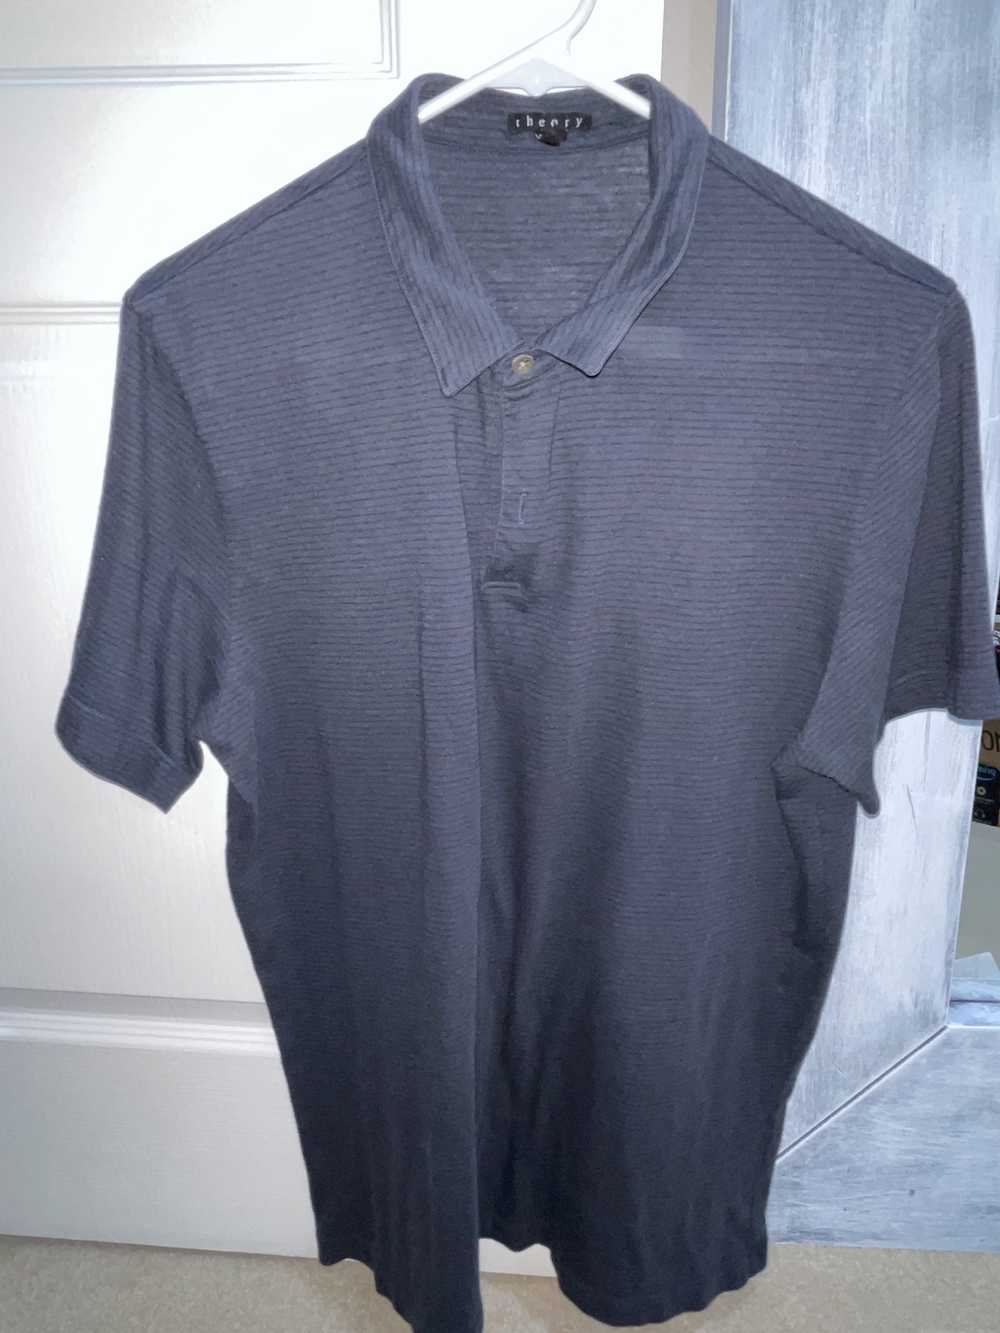 Theory Gently Used Men's Theory XL Black Short Sl… - image 2